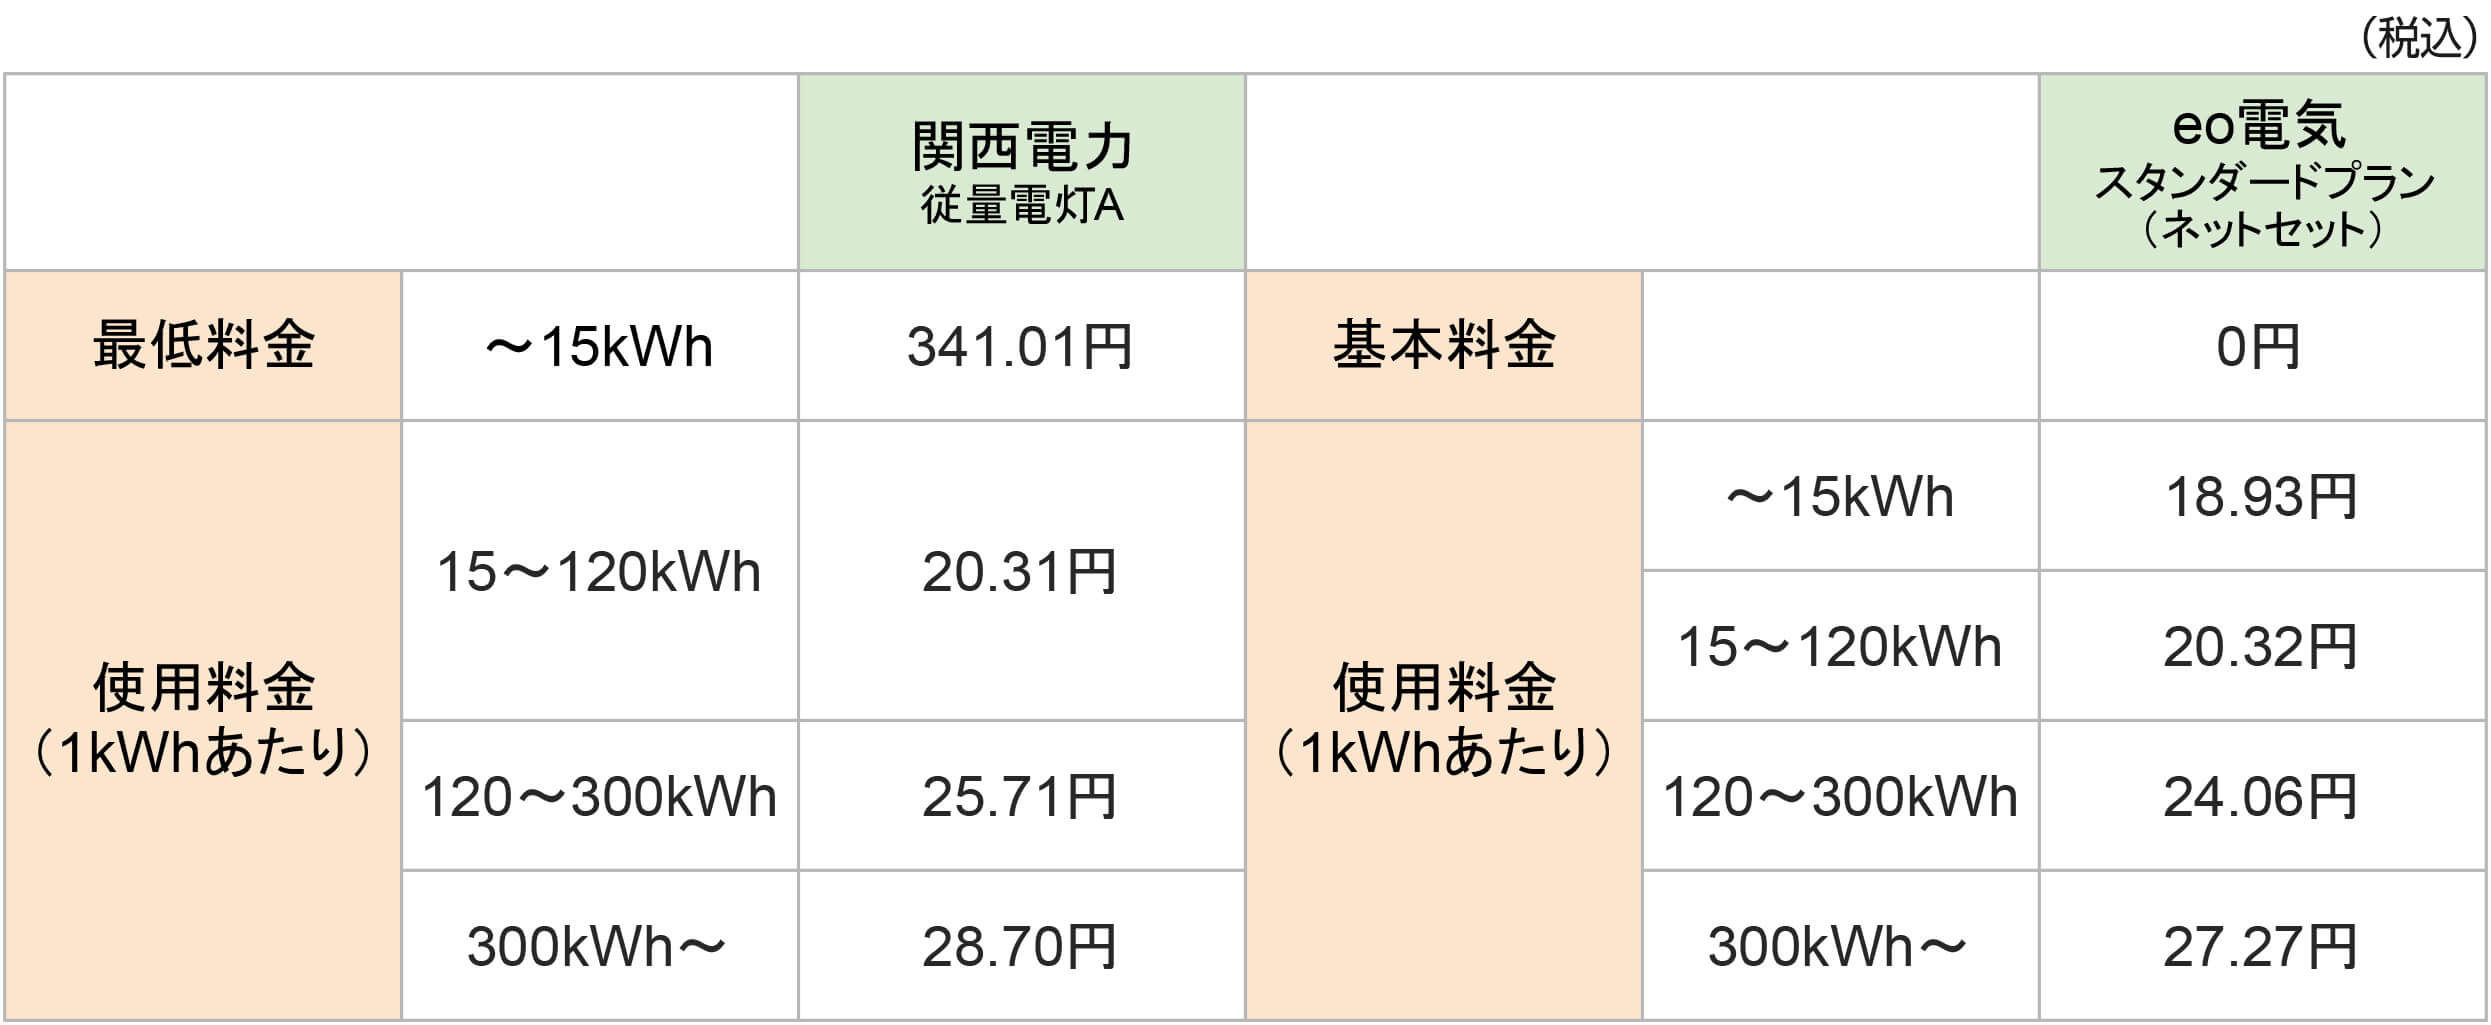 eo電気と関西電力の料金プラン